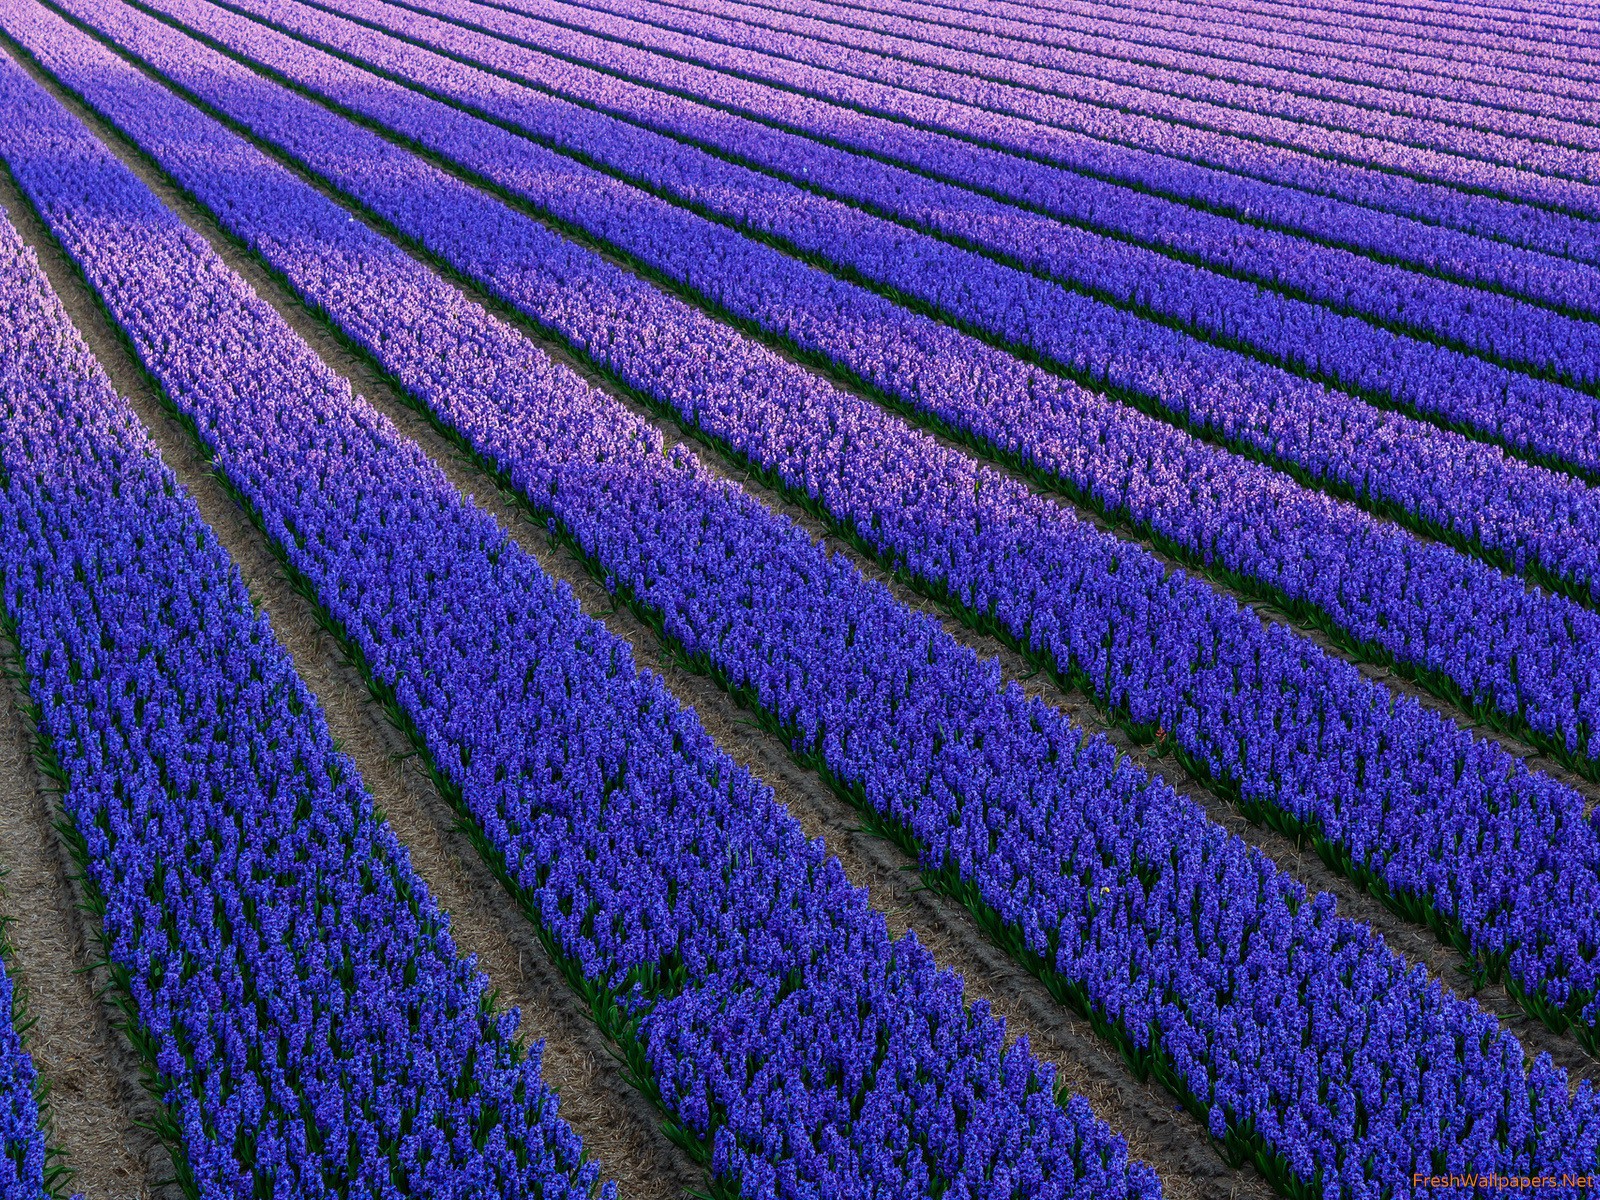 Dutch Hyacinth Field of Blue Flowers wallpapers | Freshwallpapers